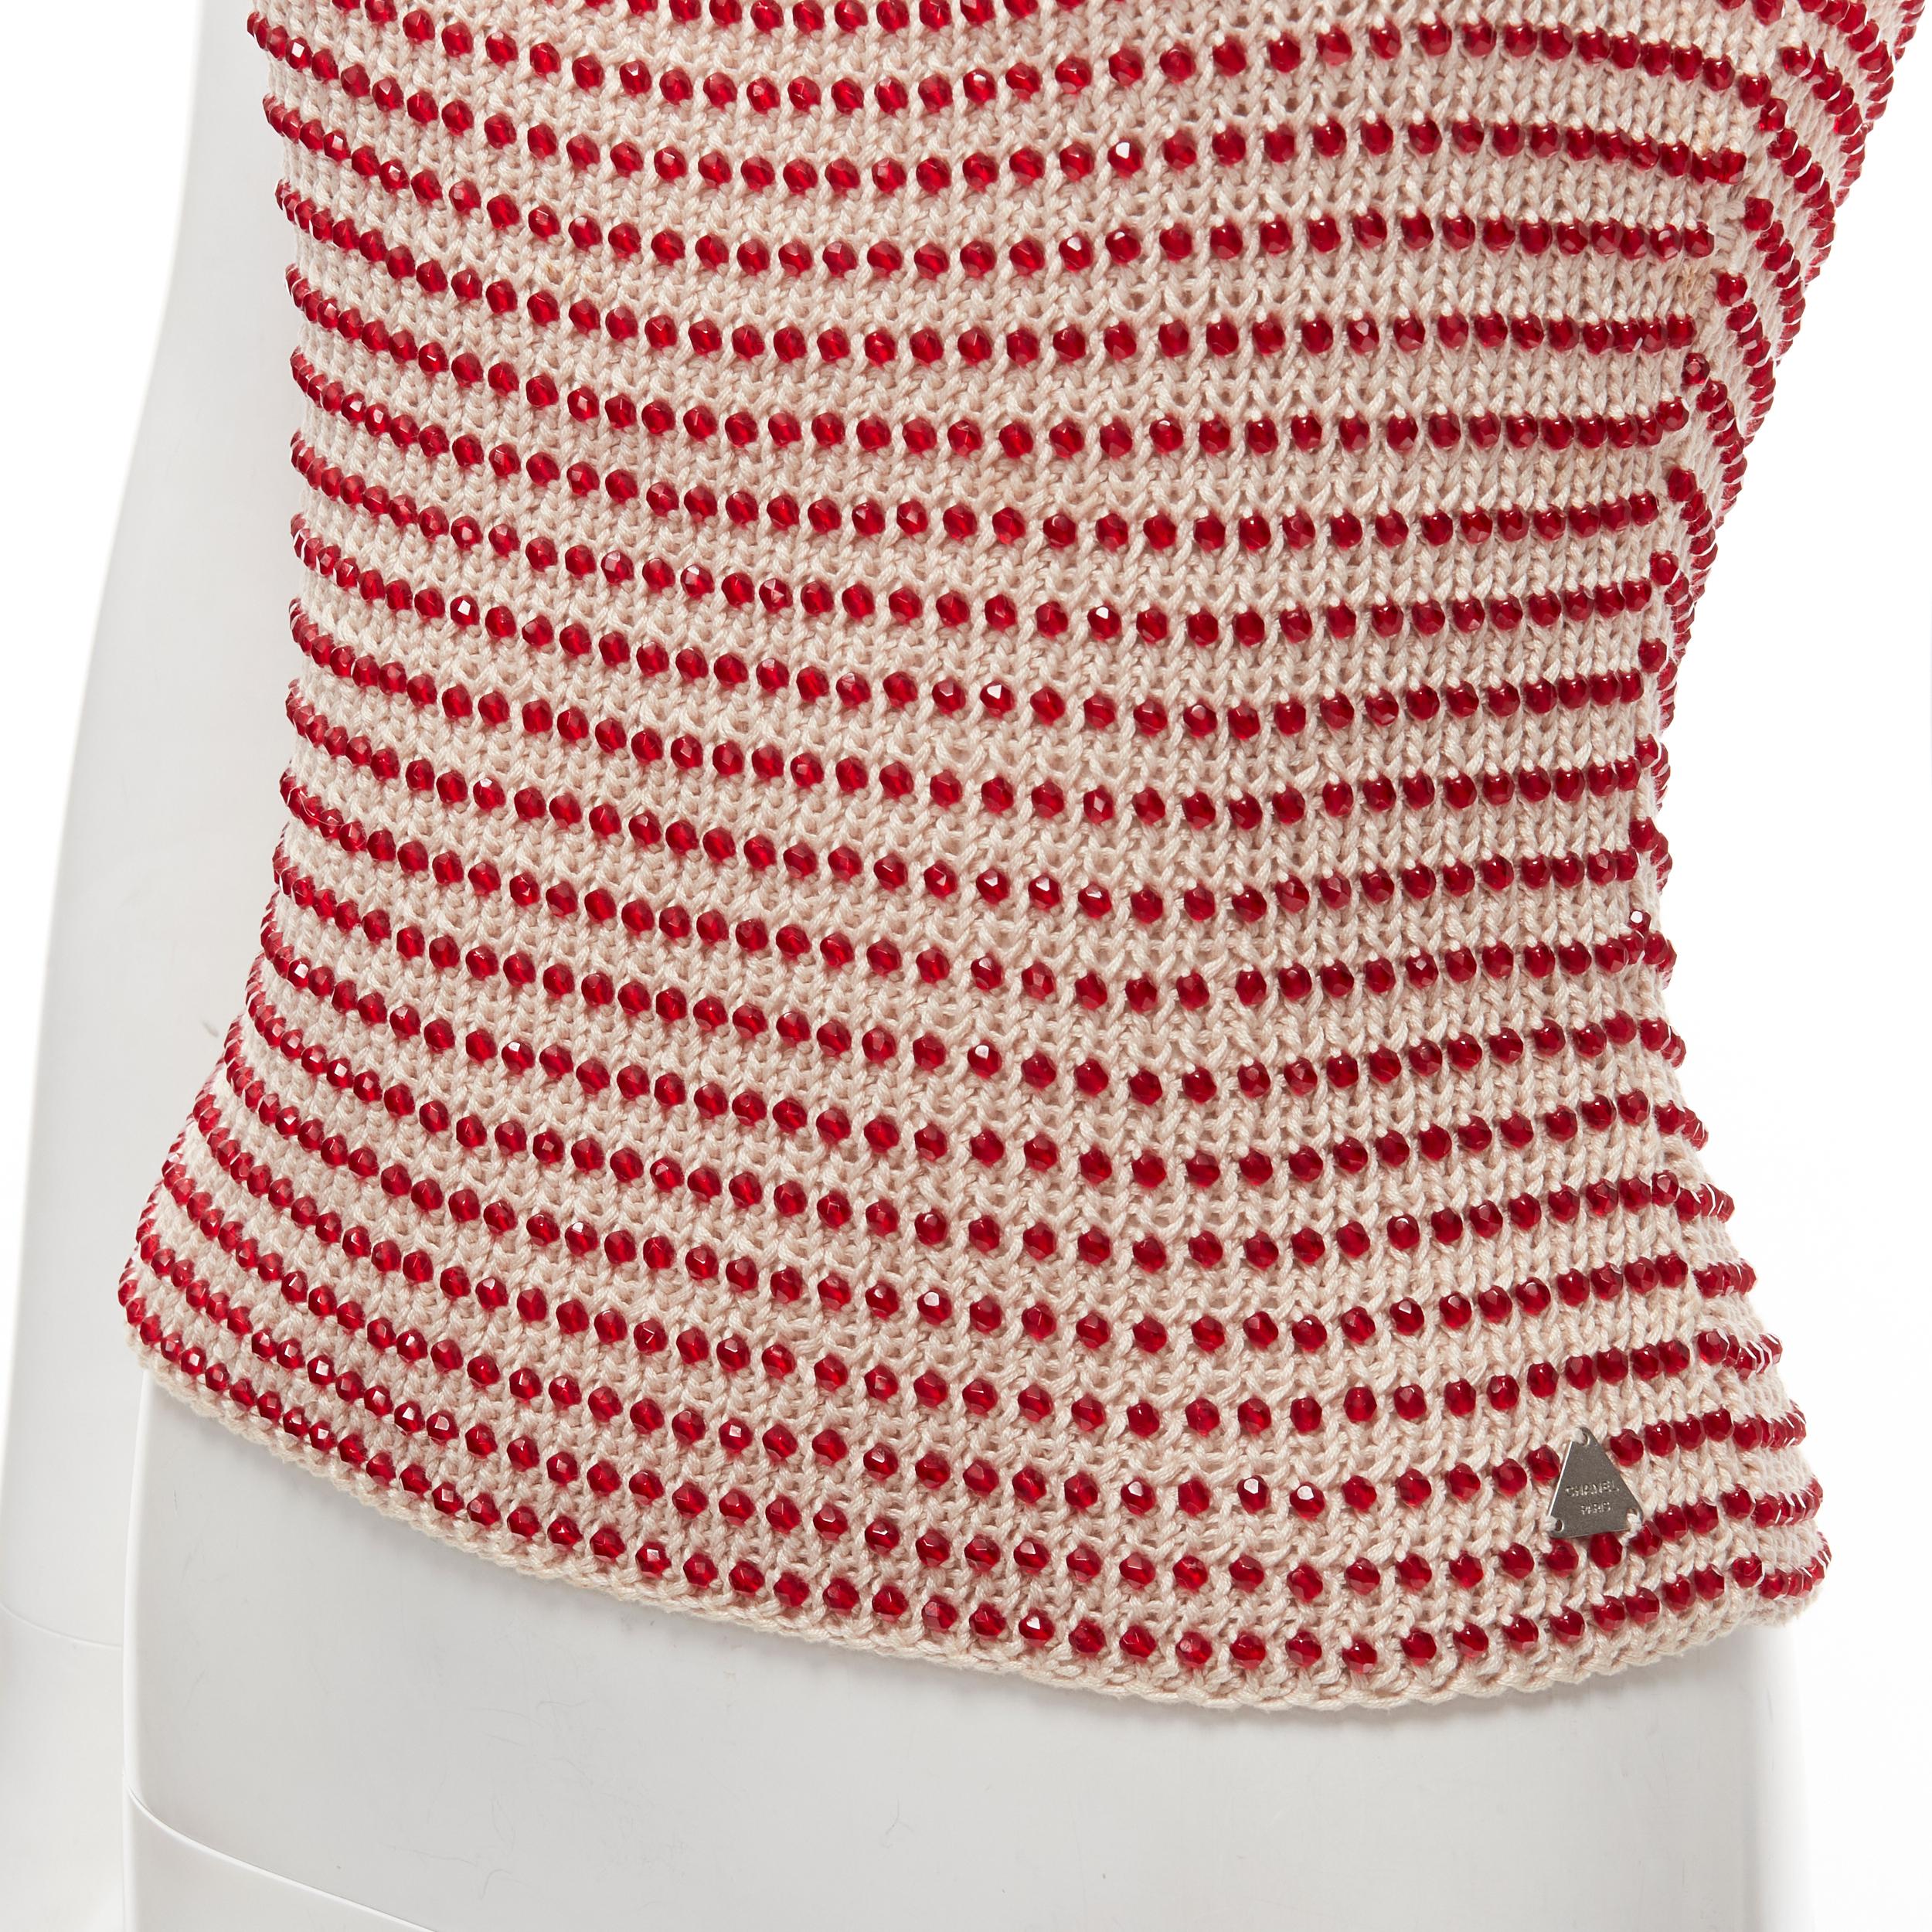 CHANEL 00C ribbed knit cotton red bead embellished CC cami tank FR40 M
Reference: TGAS/C01711
Brand: Chanel
Designer: Karl Lagerfeld
Collection: 2000C
Material: Cotton
Color: Red, Beige
Pattern: Solid
Closure: Pullover
Extra Details: CHANEL PARIS